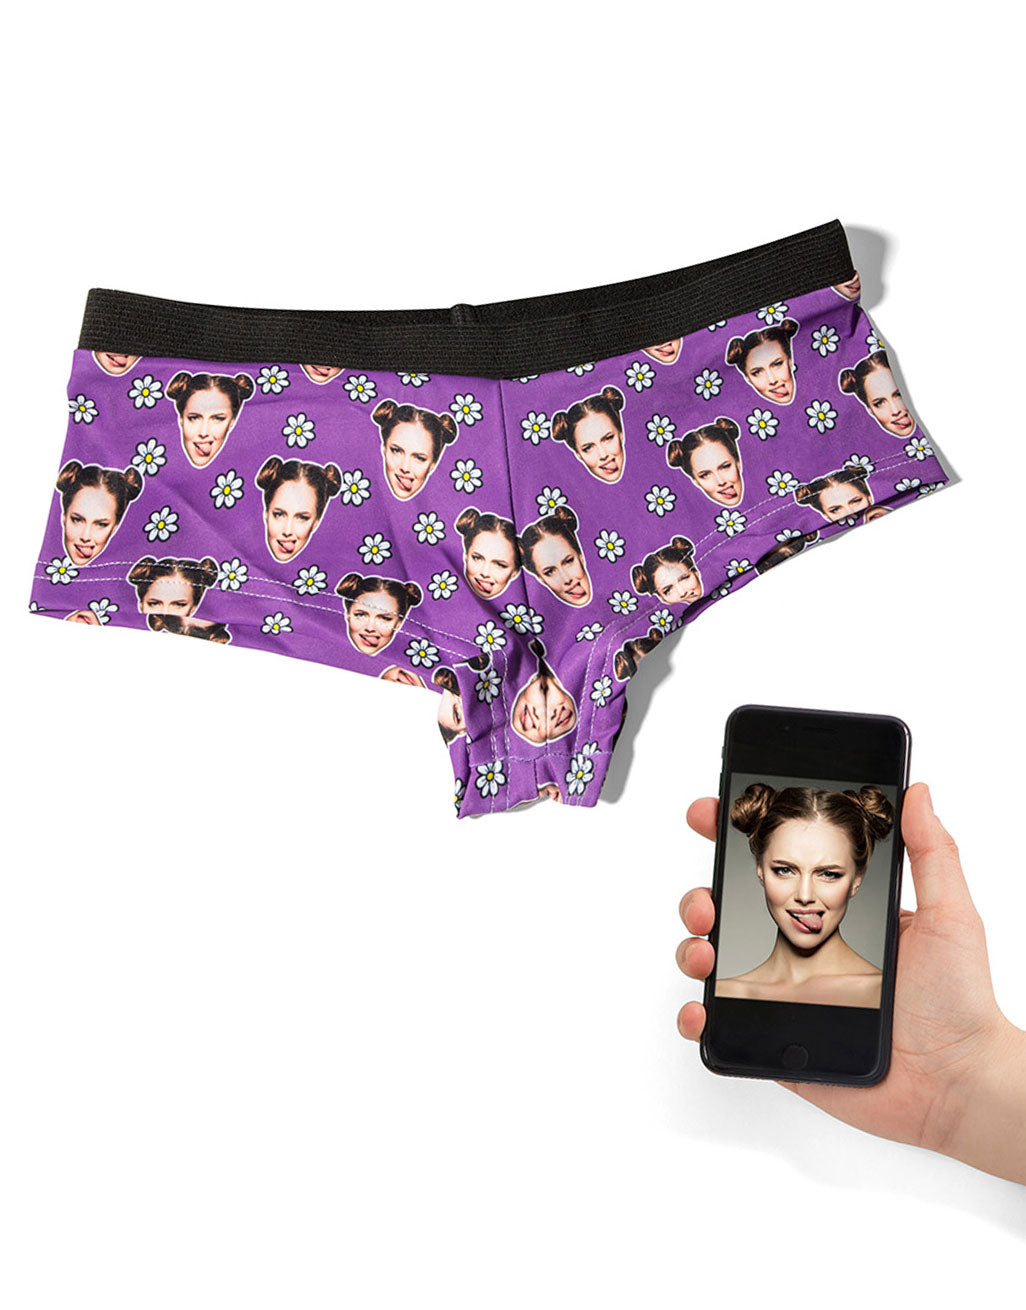 Your Face On Daisies Knickers